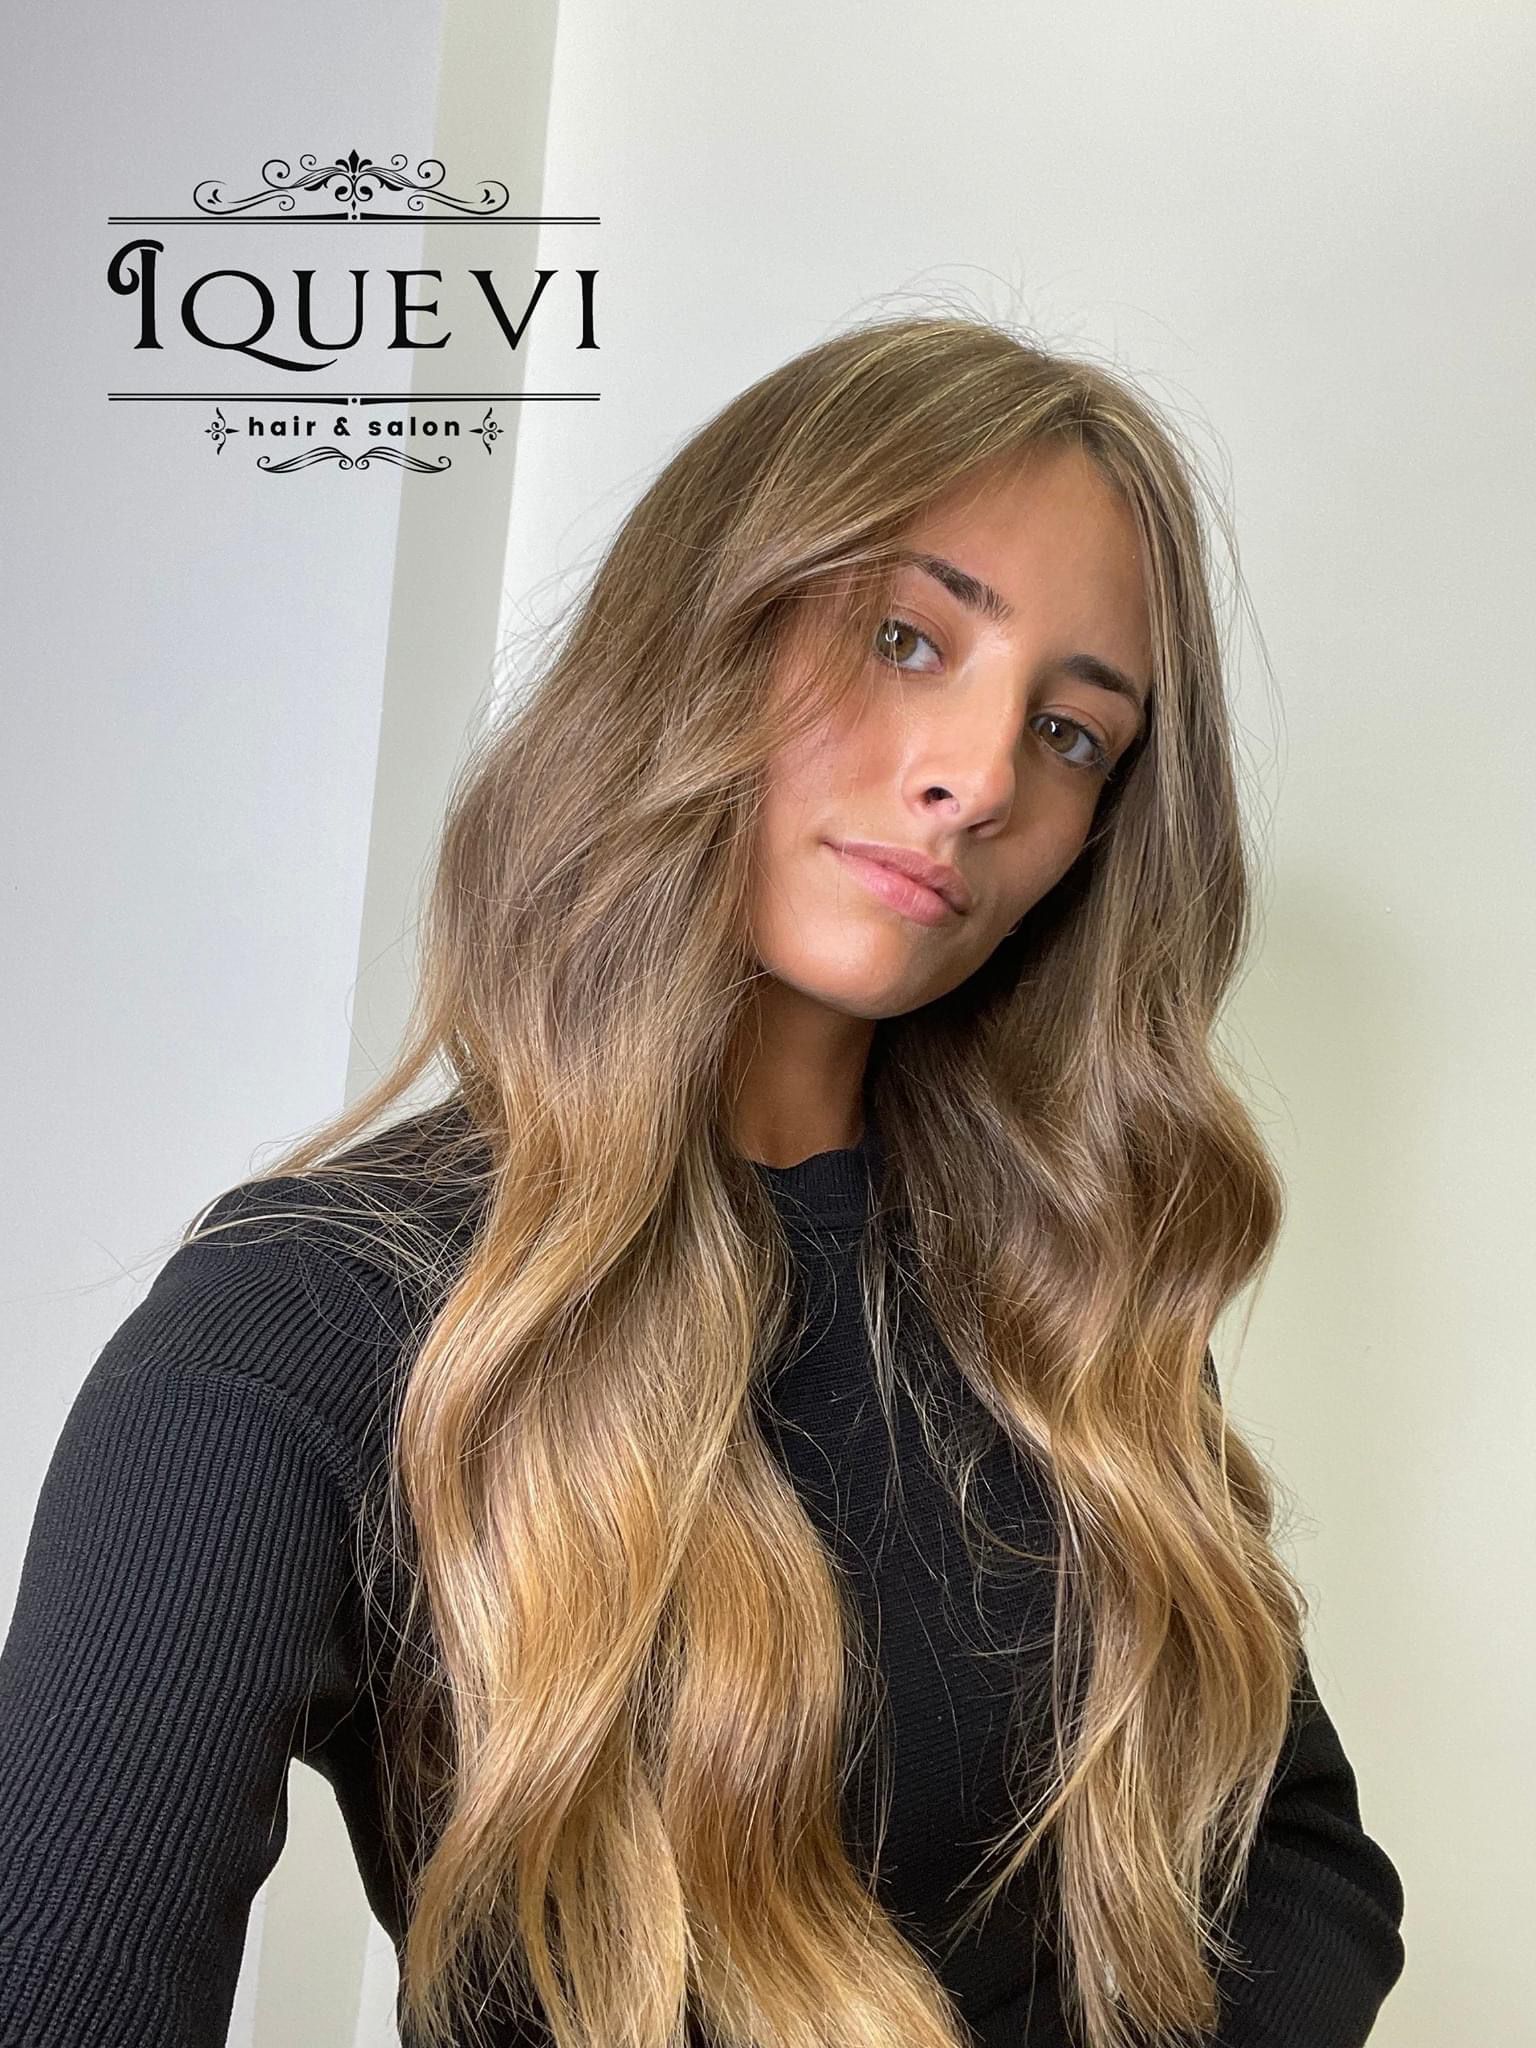 styling iquevihair